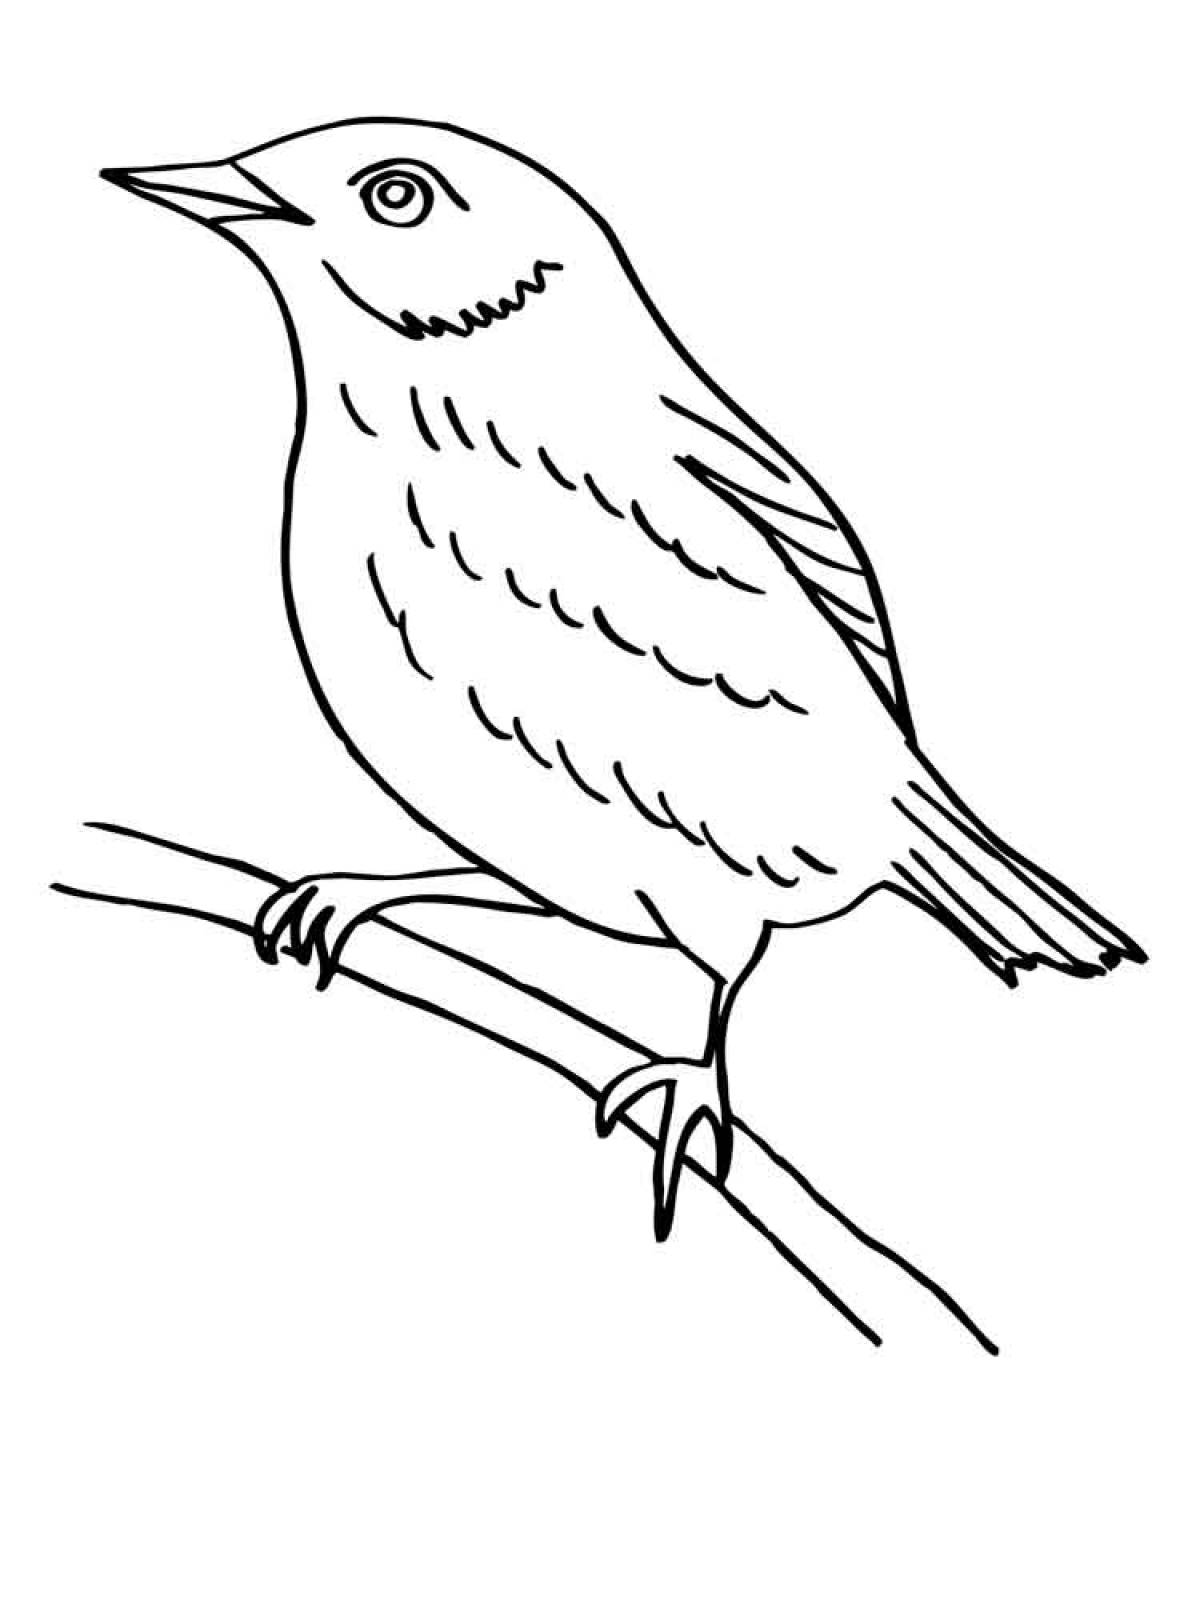 Thrush coloring page